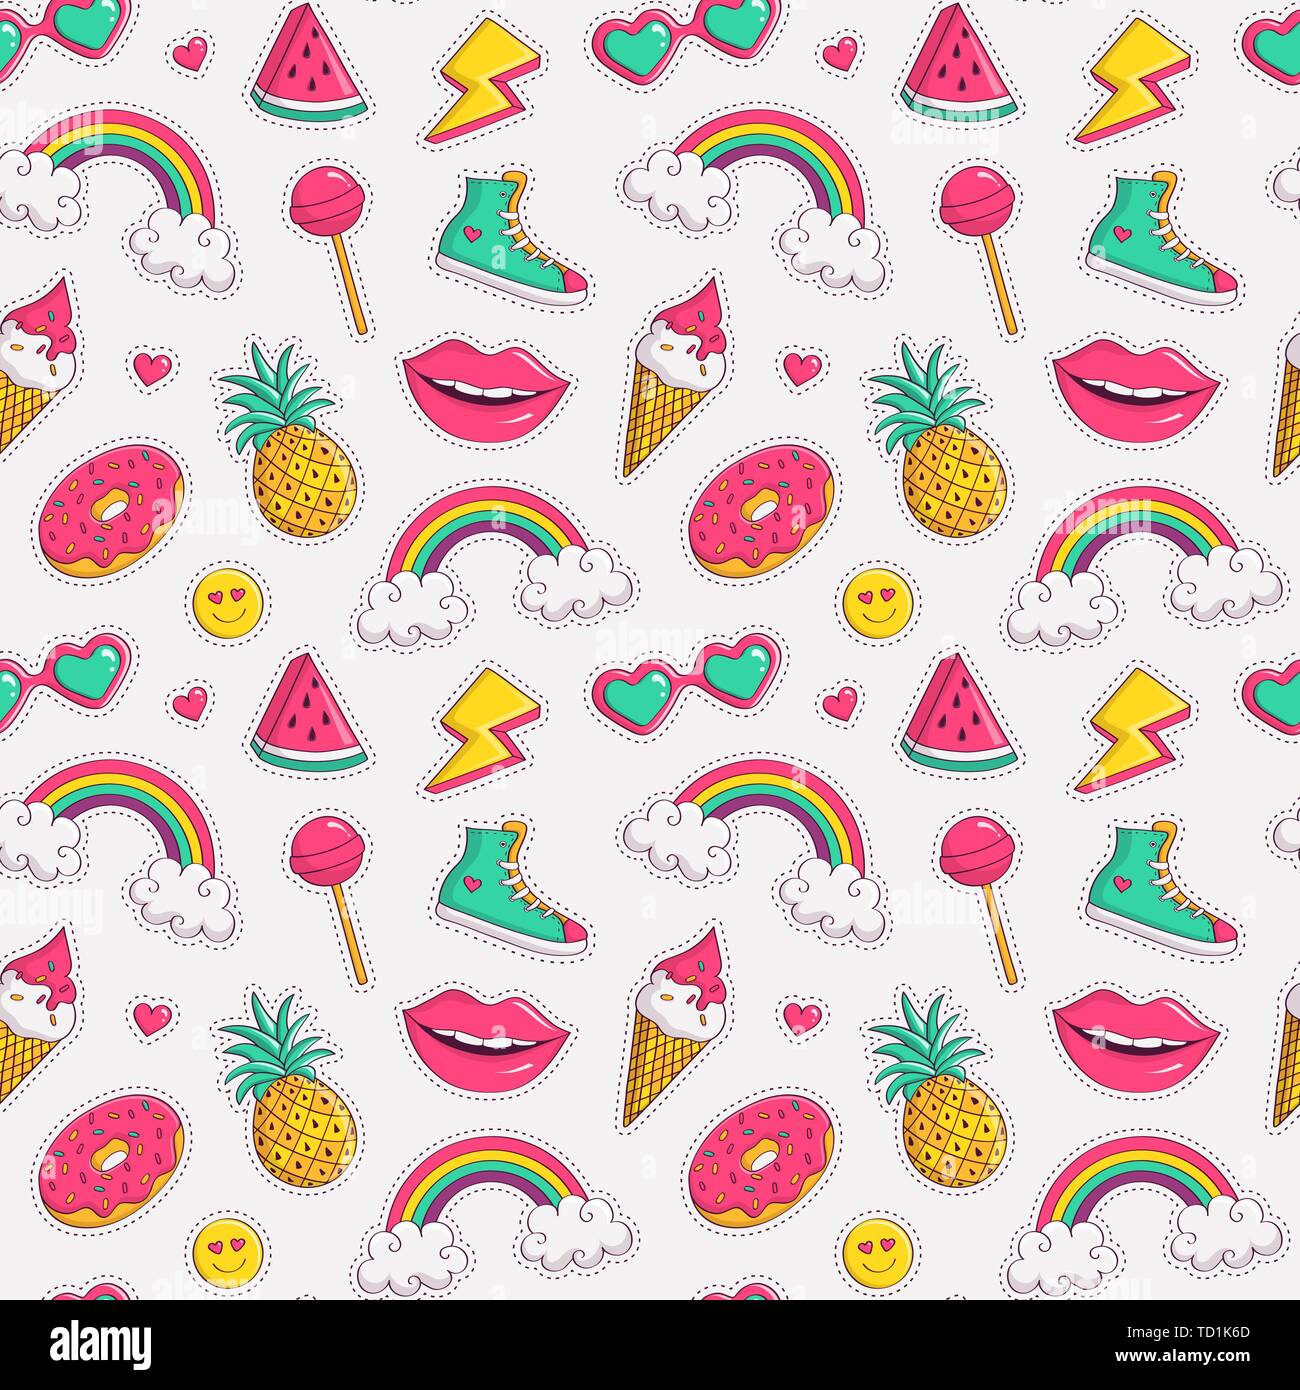 Cute seamless pattern with colorful patch badges. Fashion background in white, pink, blue-green and yellow colors. Vector trendy illustration. Stock Vector